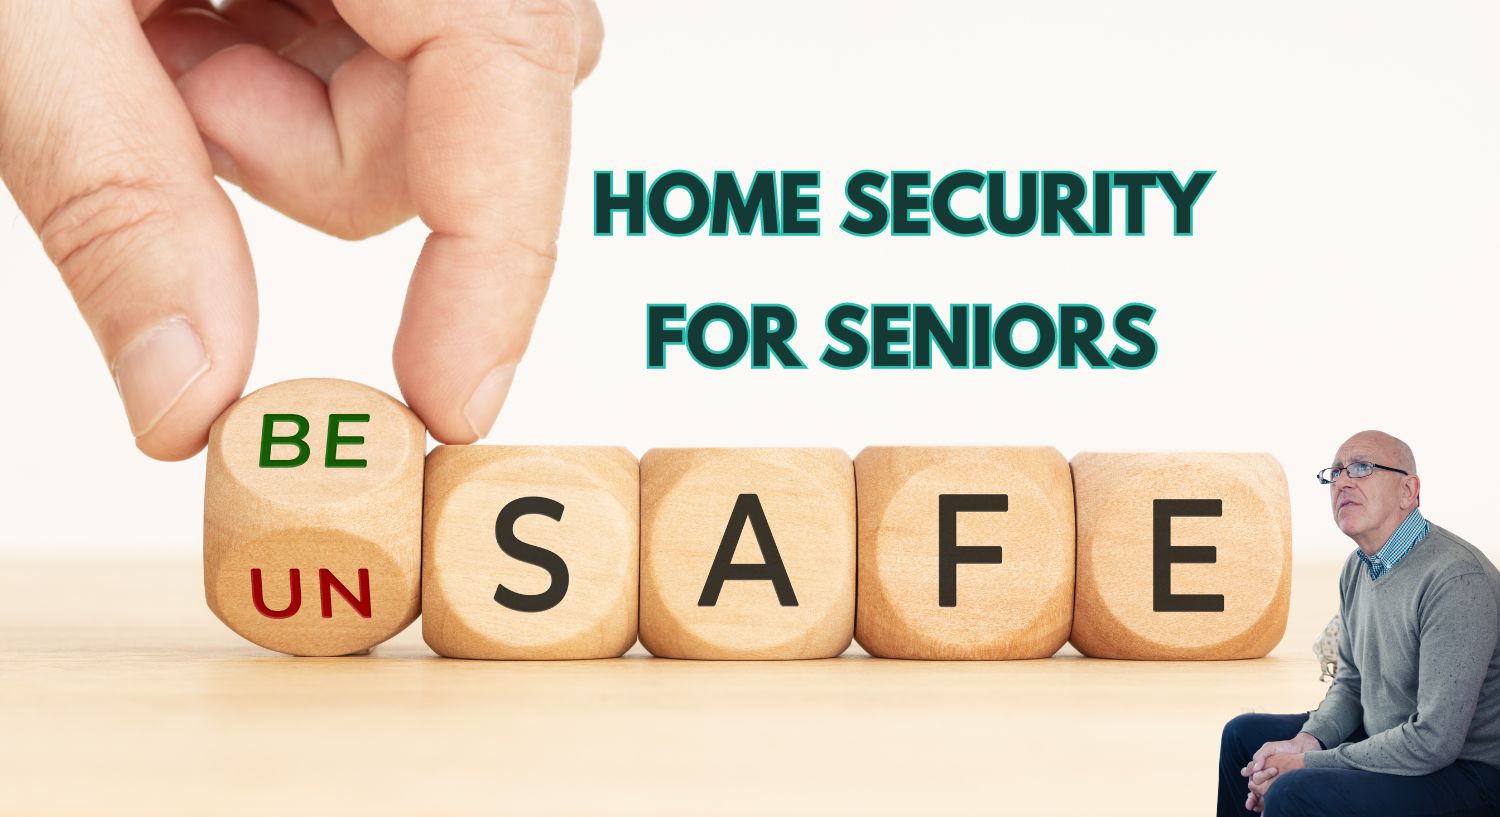 Home Security for Seniors: 3 Great Ways to Make Your Home Safer and More Secure